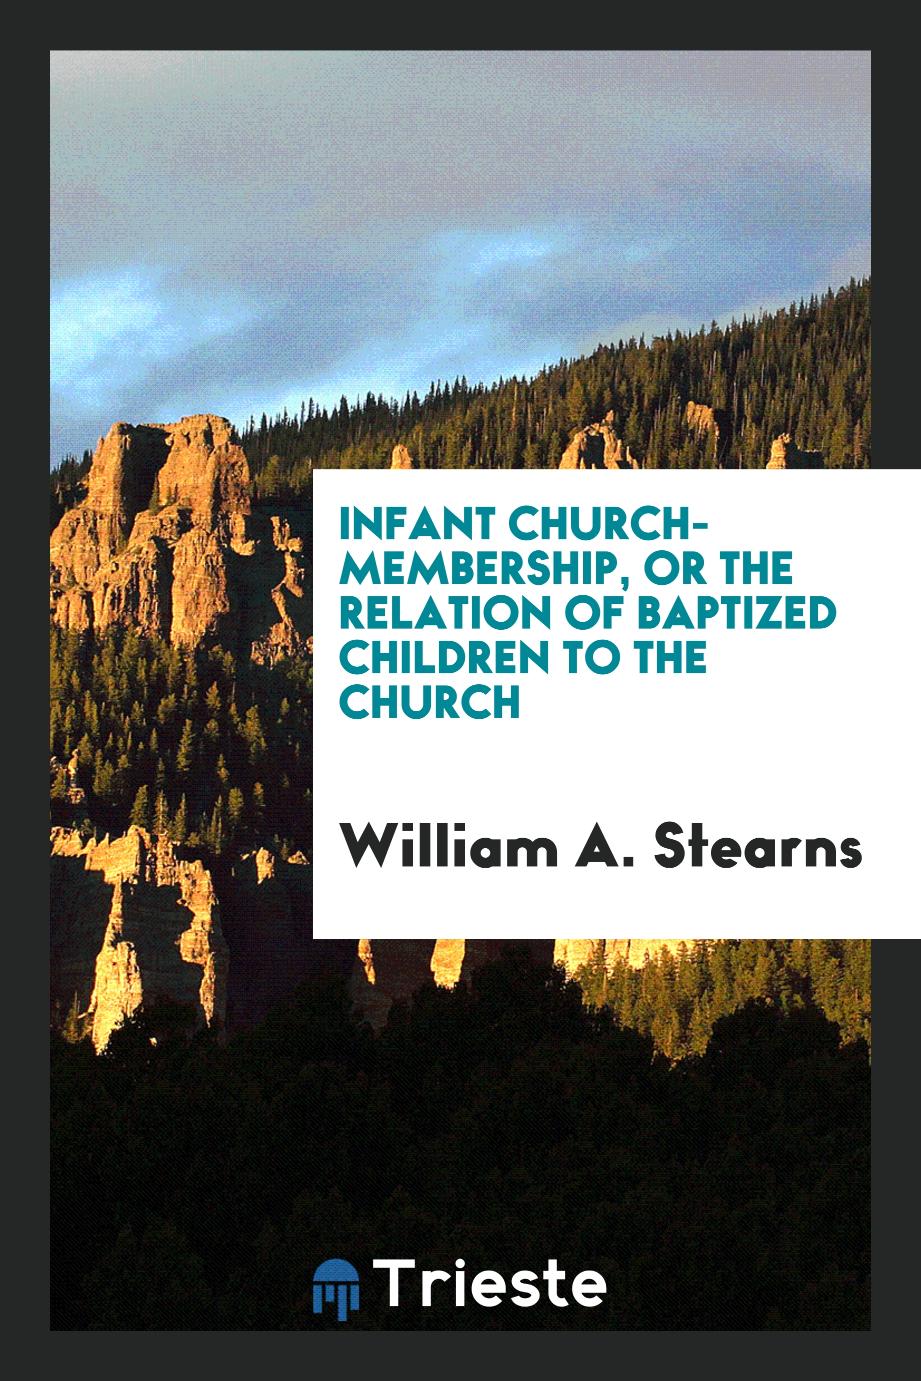 Infant Church-Membership, or the Relation of Baptized Children to the Church